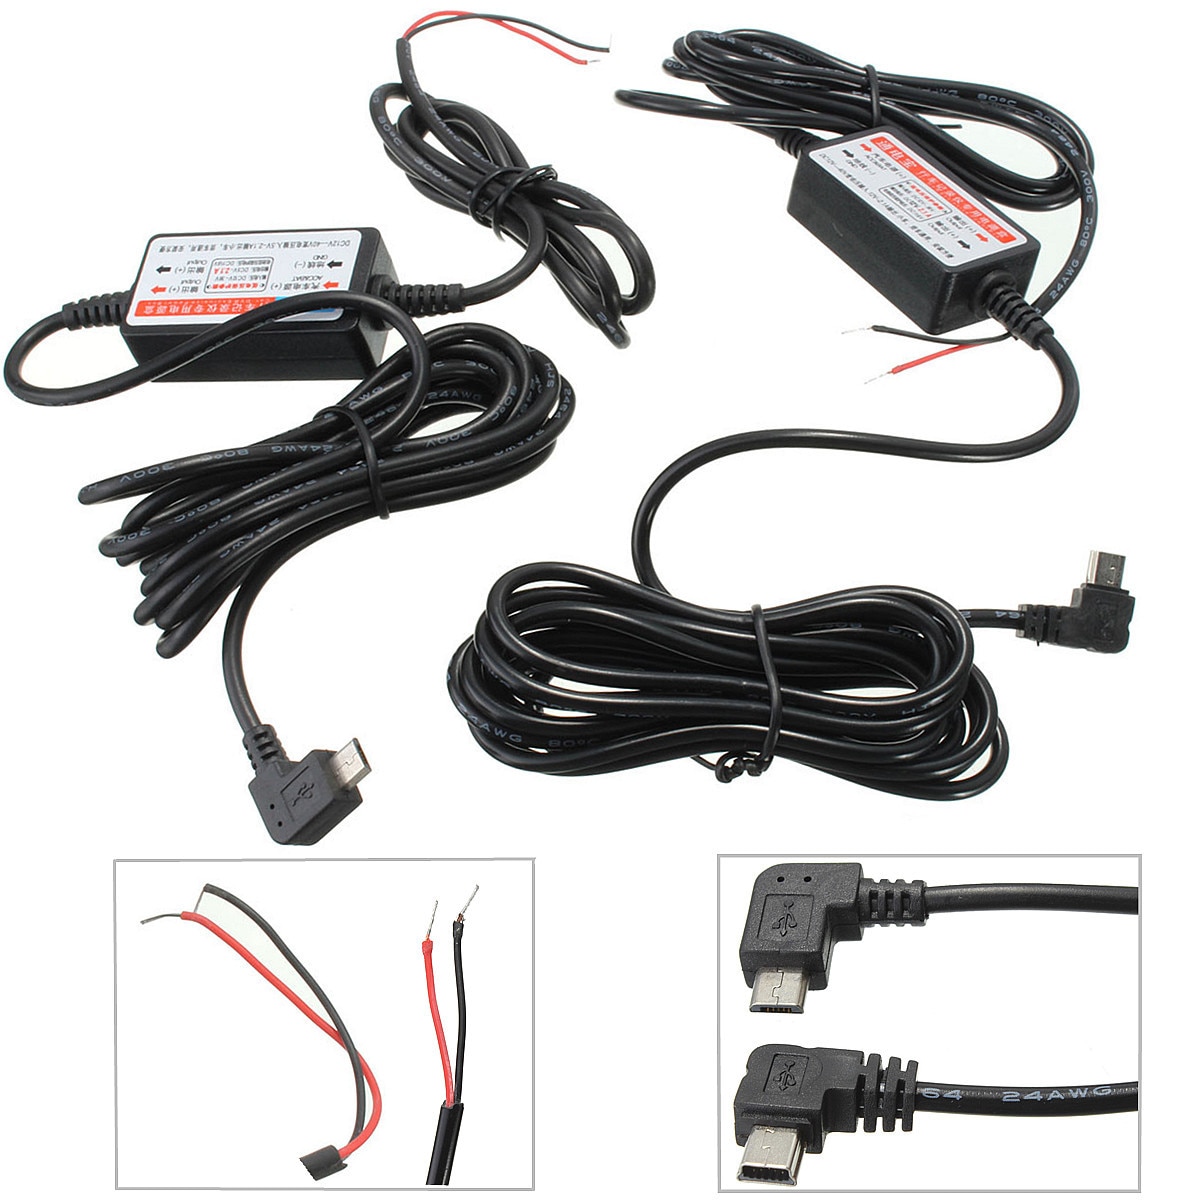 Dc 5V 2A Mini / Micro Usb-poort Draad Kabel Car Charger Kit Voor Camera Recorder Dvr Exclusieve Power supply Box Buck Lijn Kit